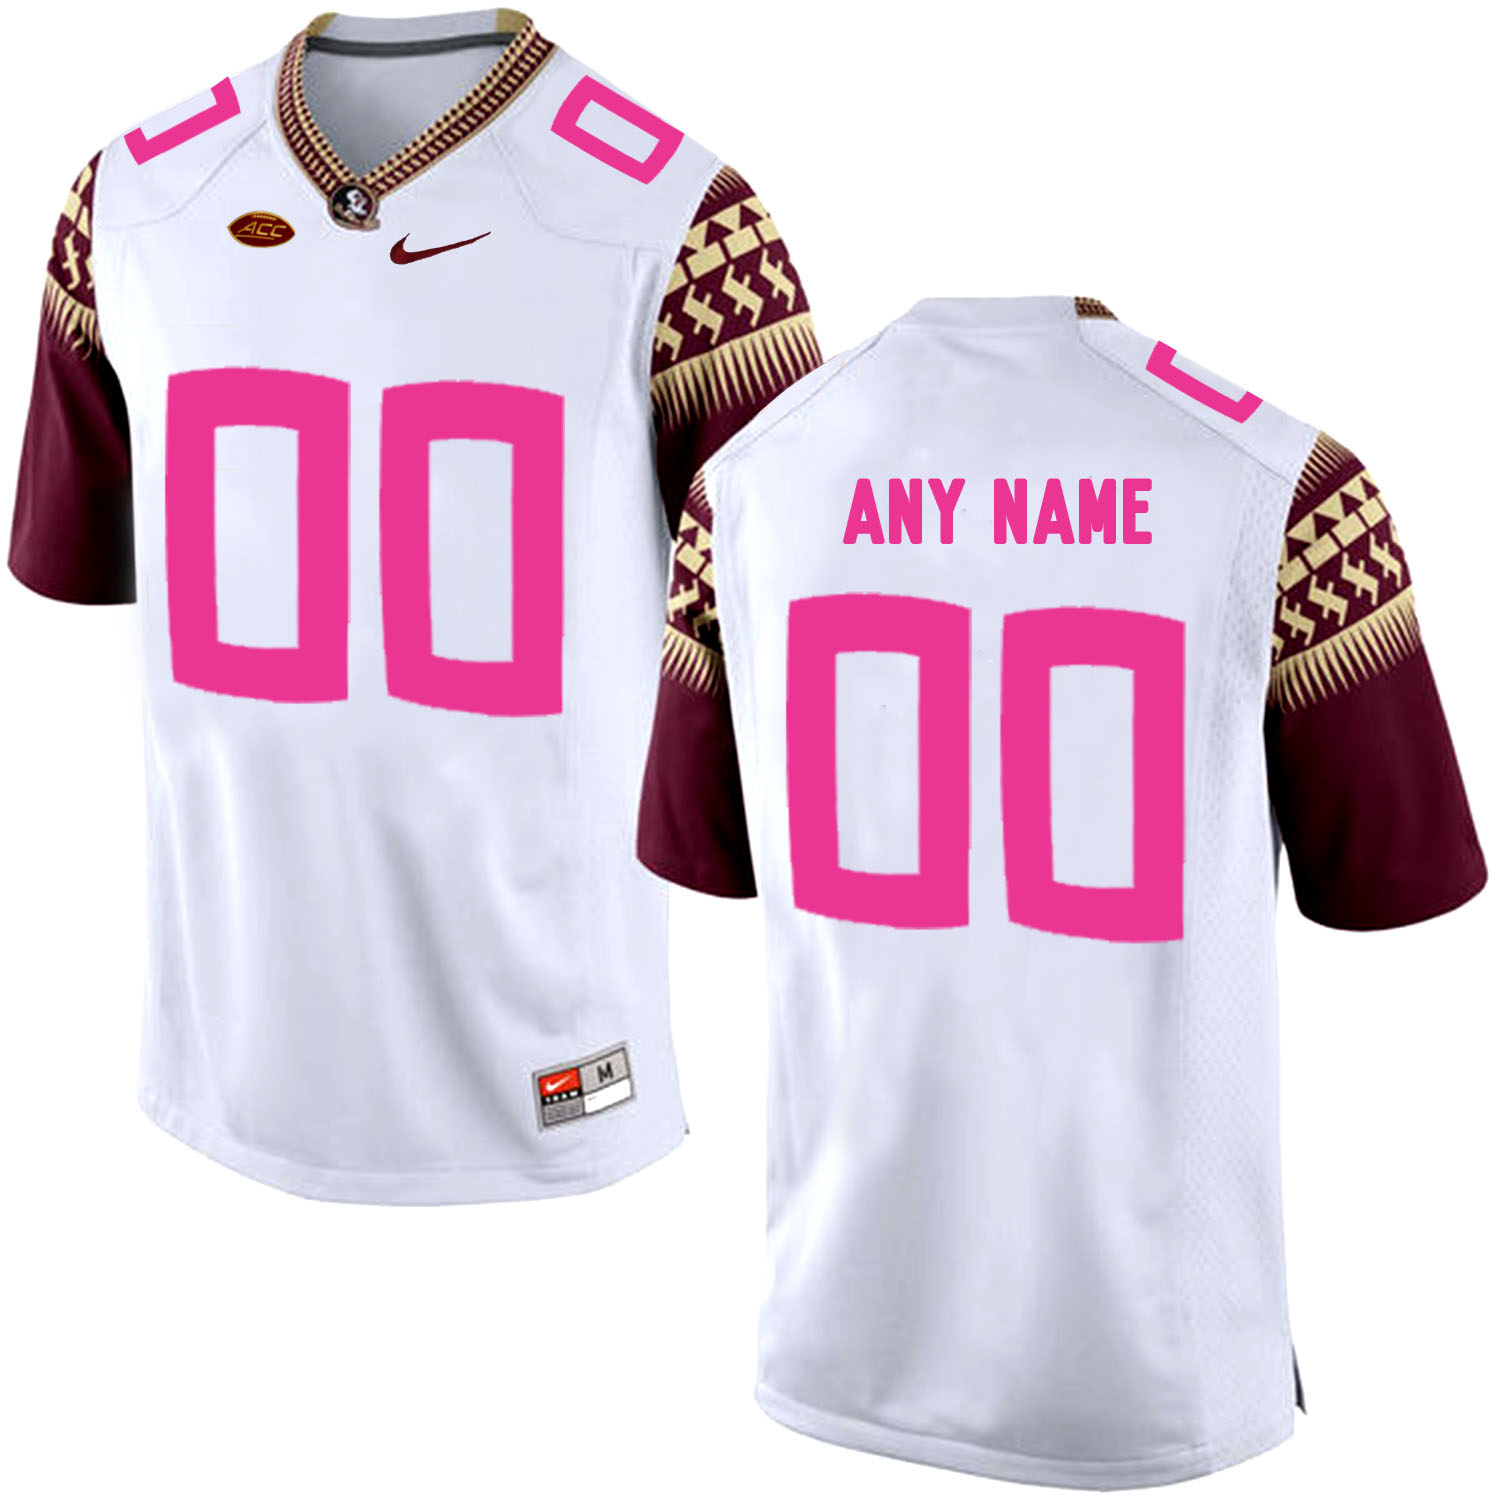 Florida State Seminoles White Men's Customized 2018 Breast Cancer Awareness College Football Jersey